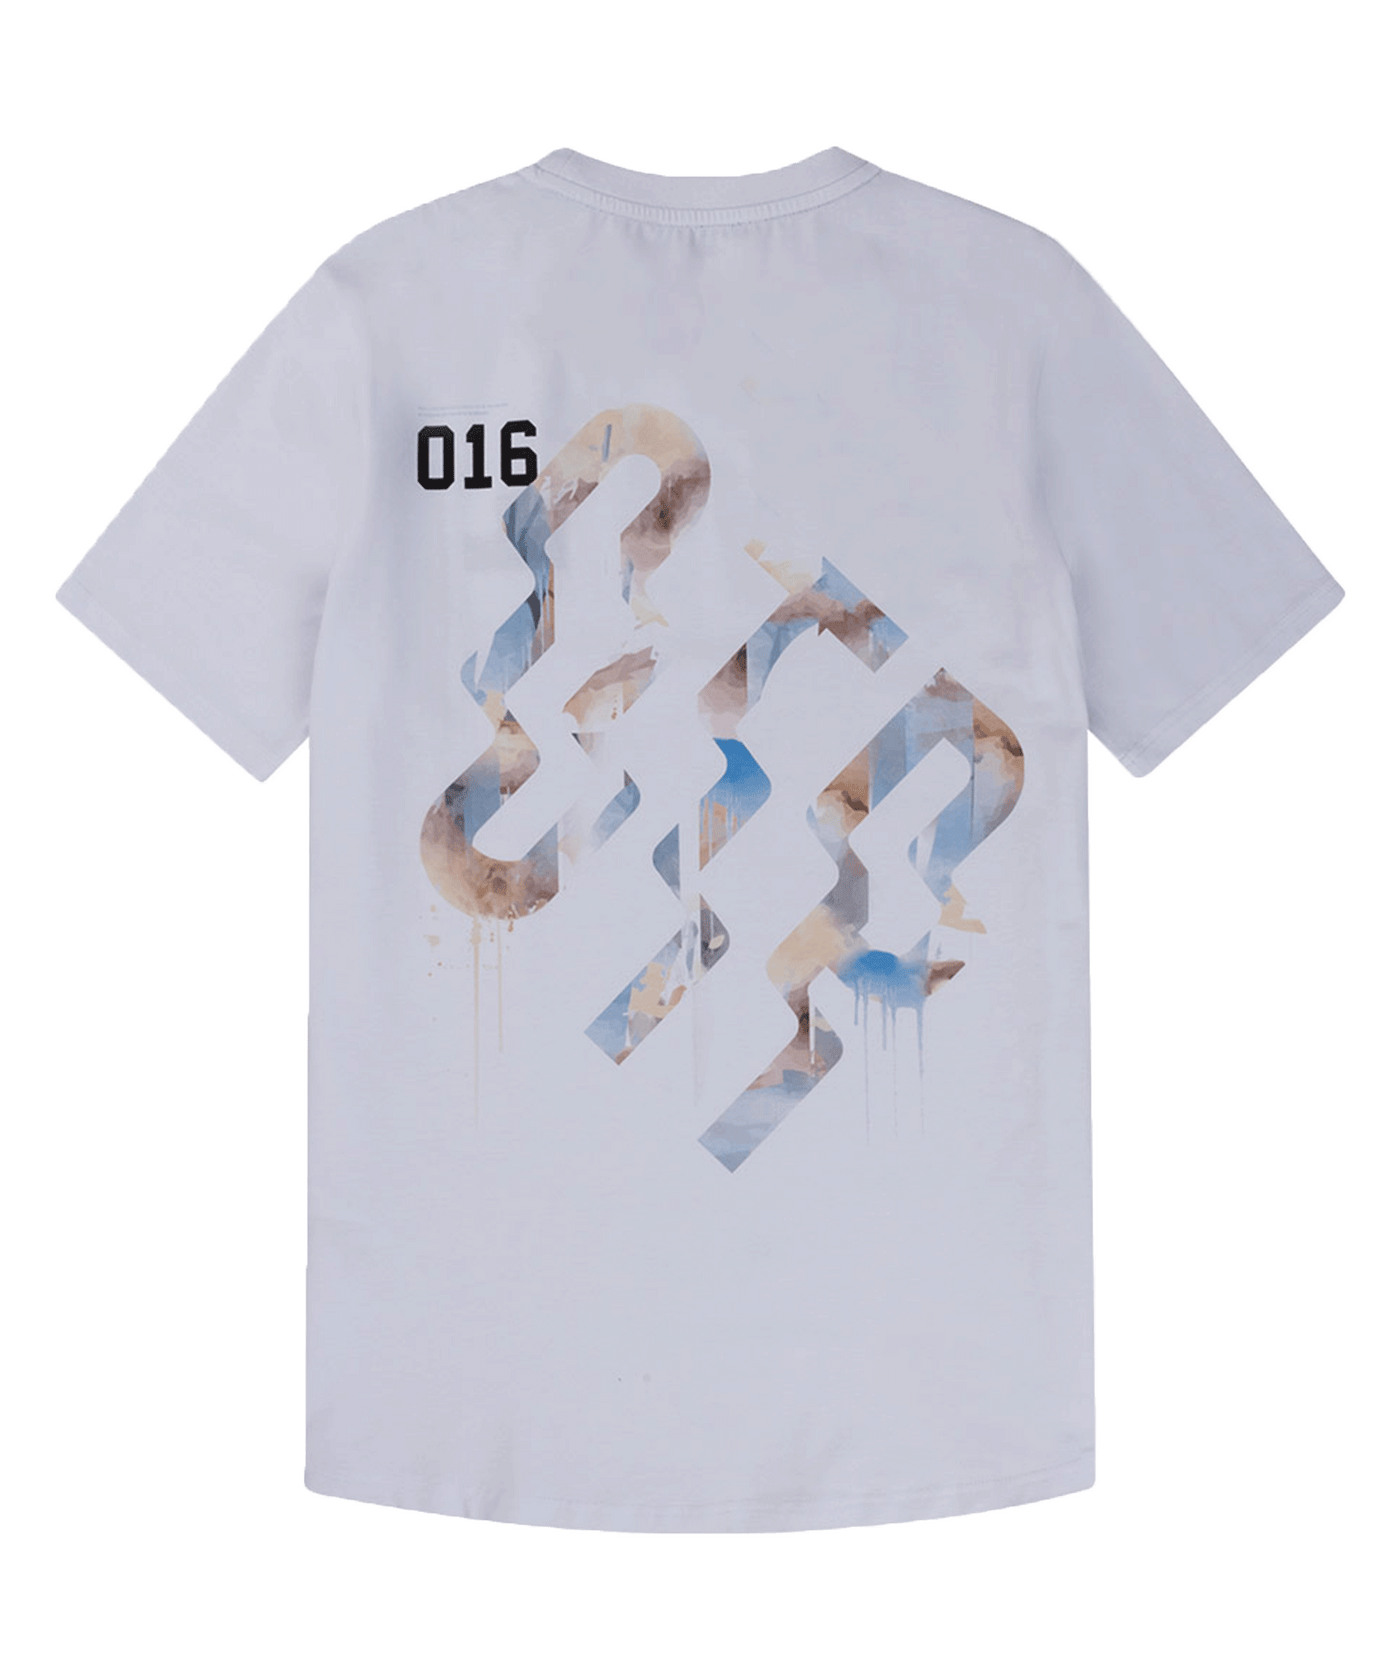 Off The Pitch - Otp241015 - Generation T-shirt - 100 White